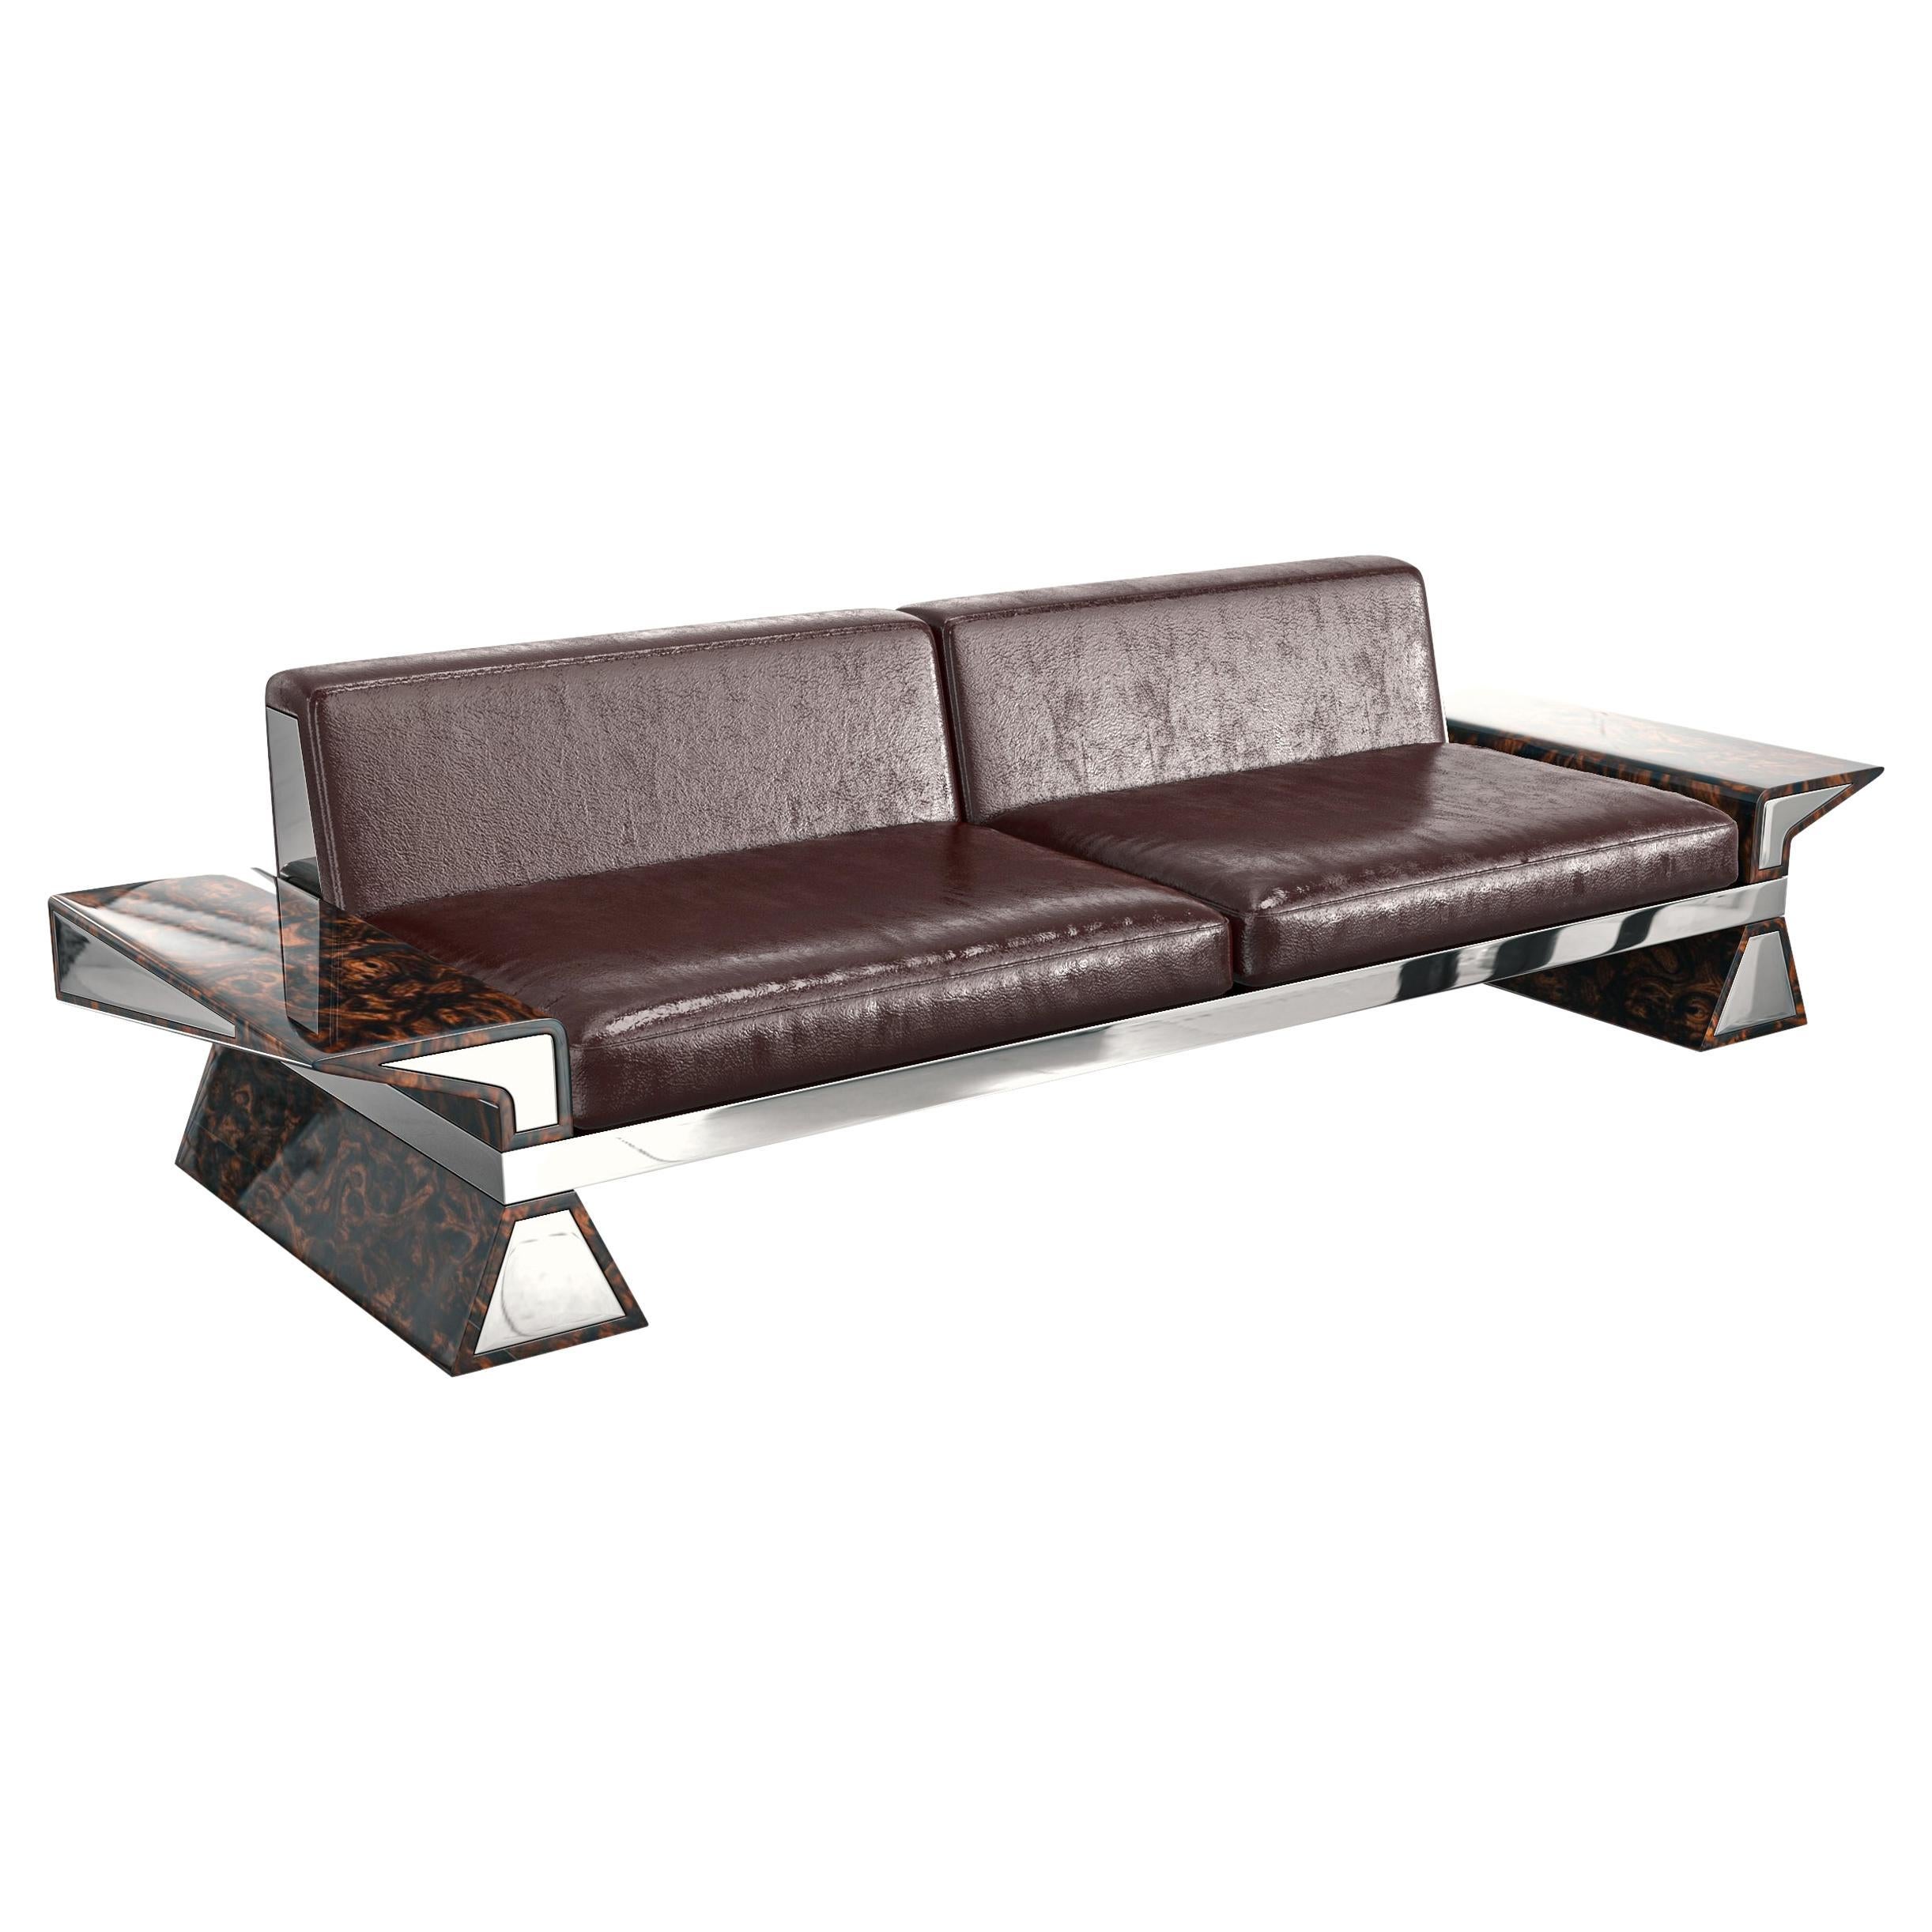 "La Ciliegia" Sofa with Stainless Steel, Burl Walnut, Hand Crafted, Istanbul For Sale